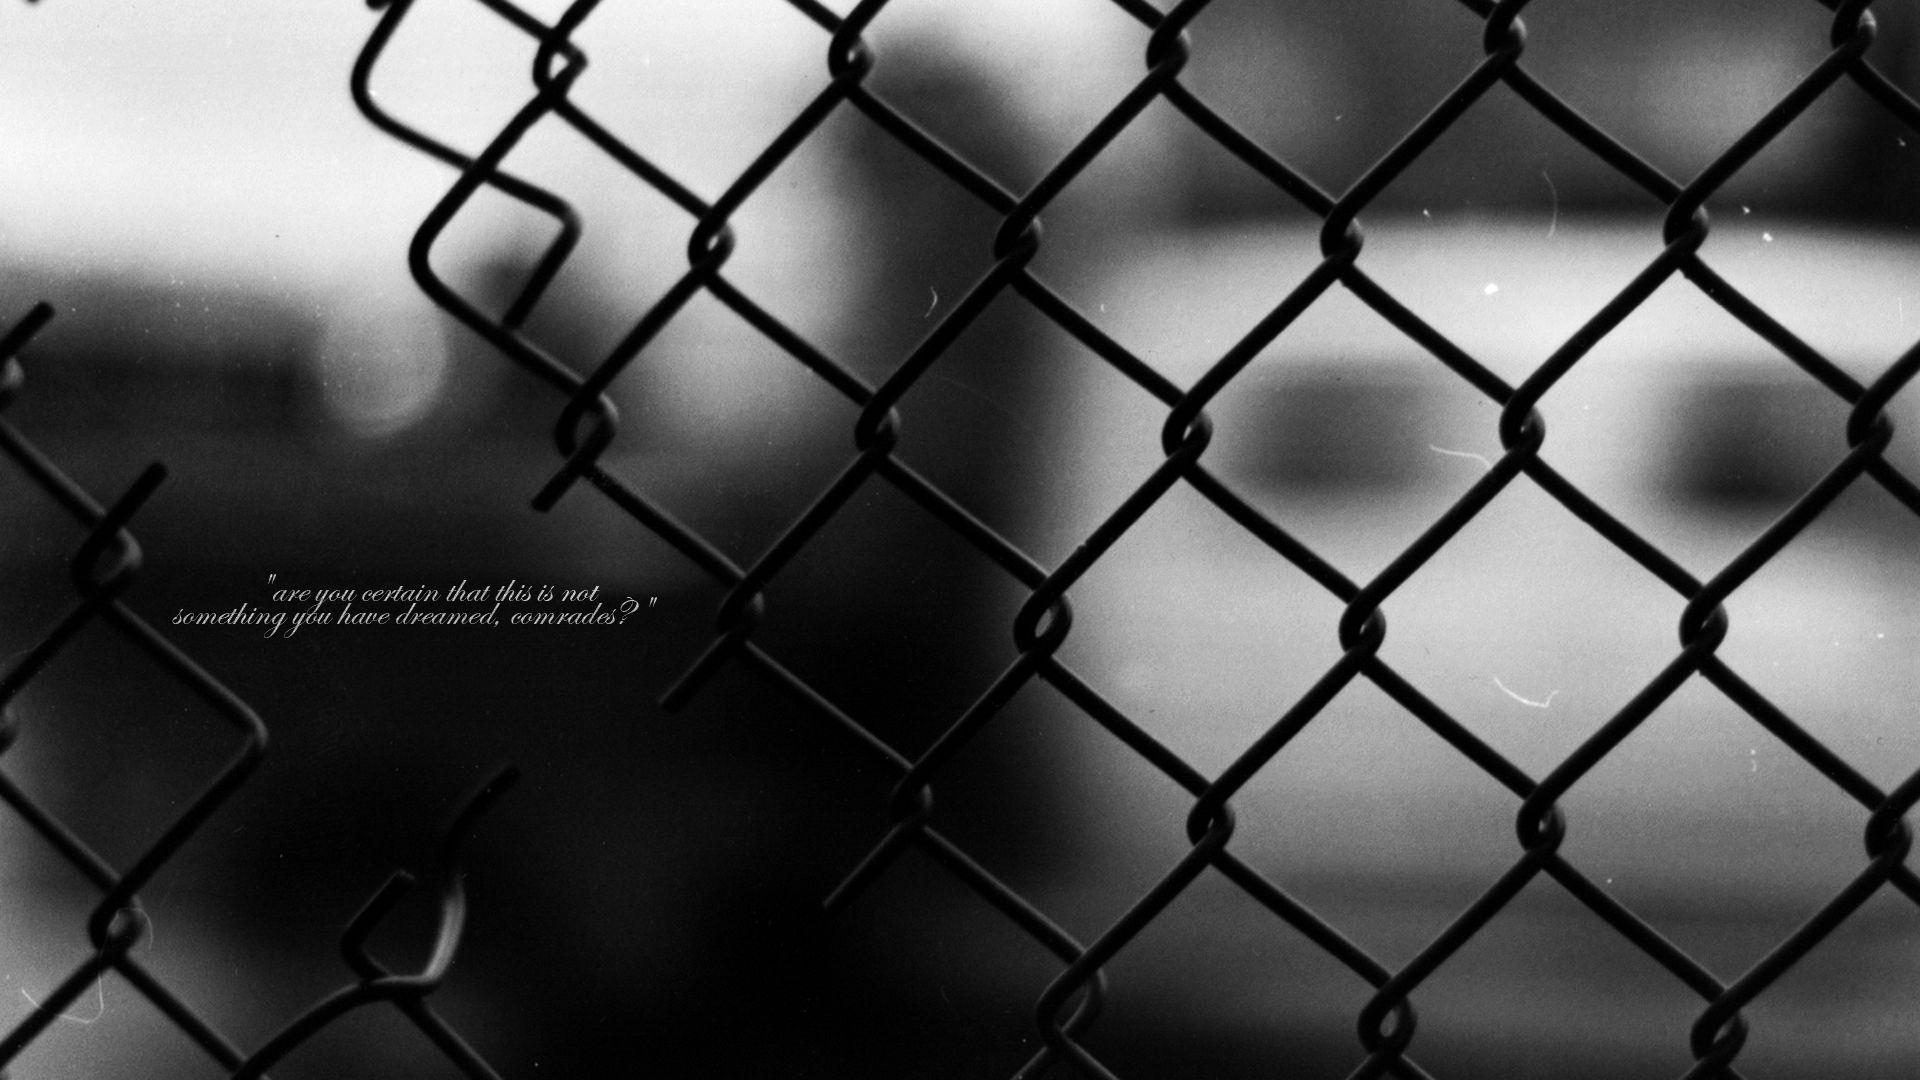 Quotes Chain Link Fence Comrade Grayscale Text #quotes #wallpaper